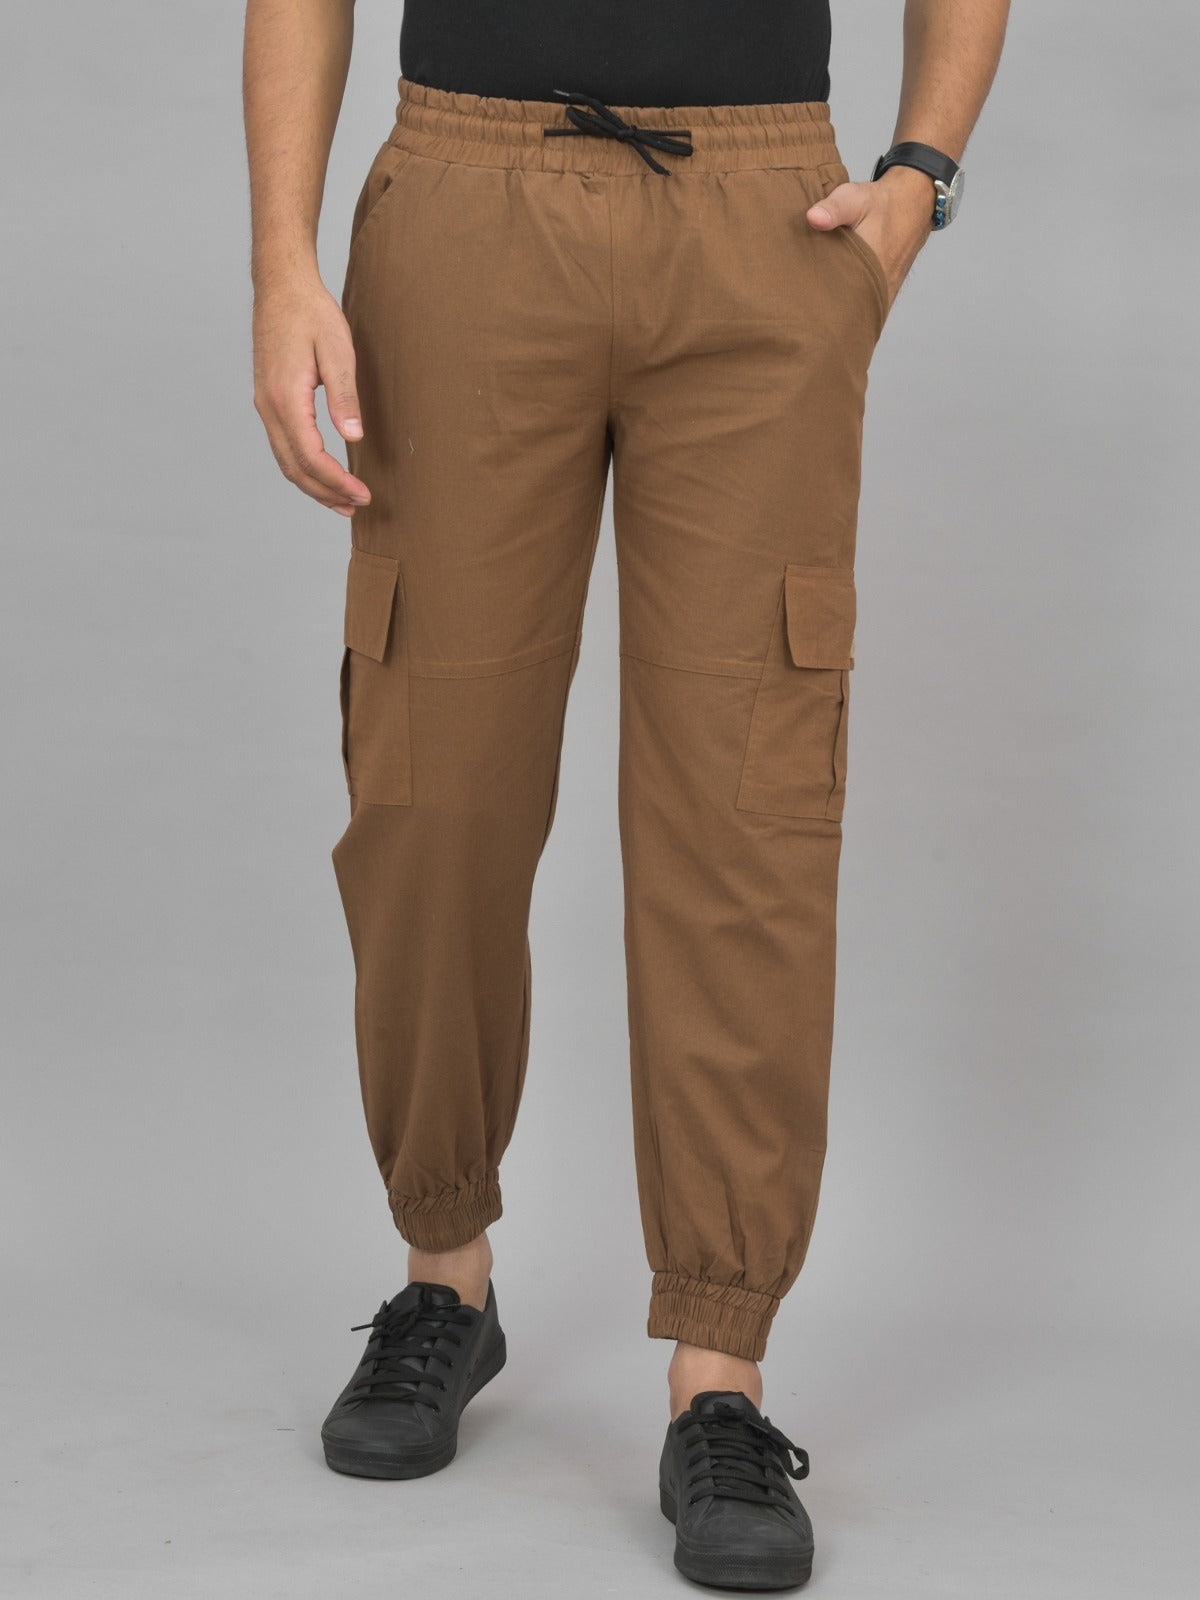 Buy Denim Four Pocket Cargo Pants Pure Cotton for Best Price, Reviews, Free  Shipping